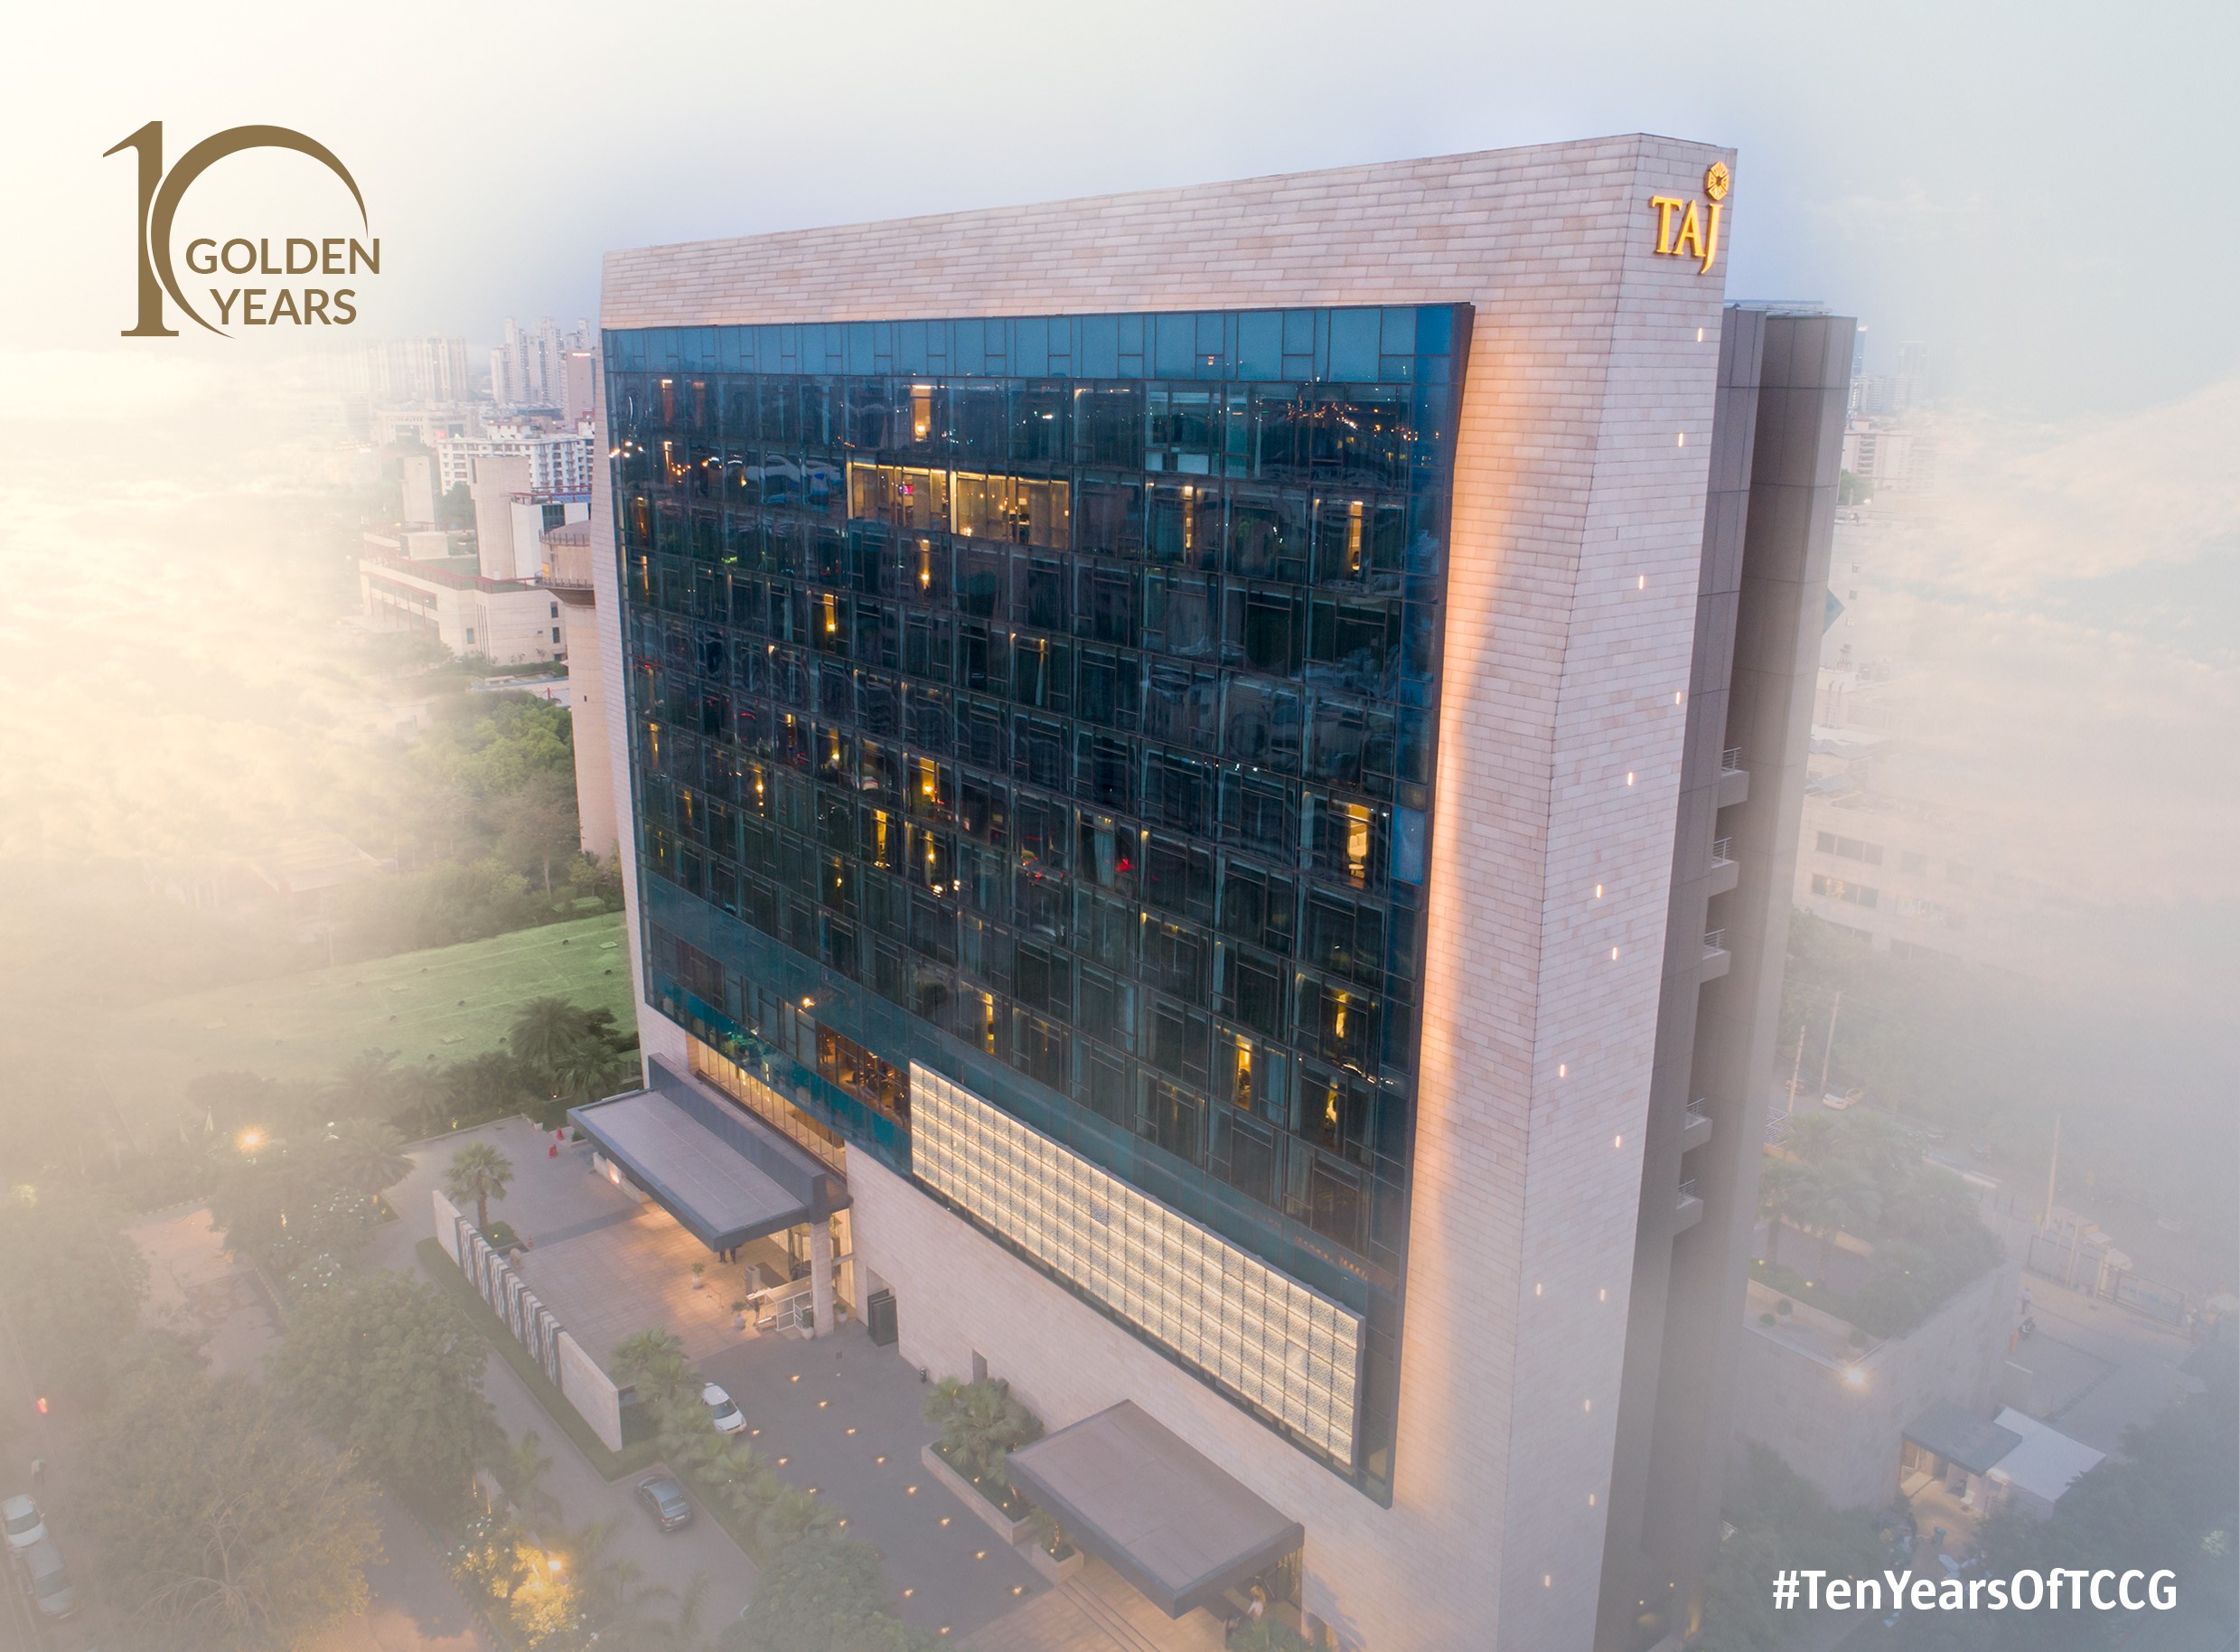 The Taj City Centre Gurugram marks 10 years of delivering outstanding hospitality experiences